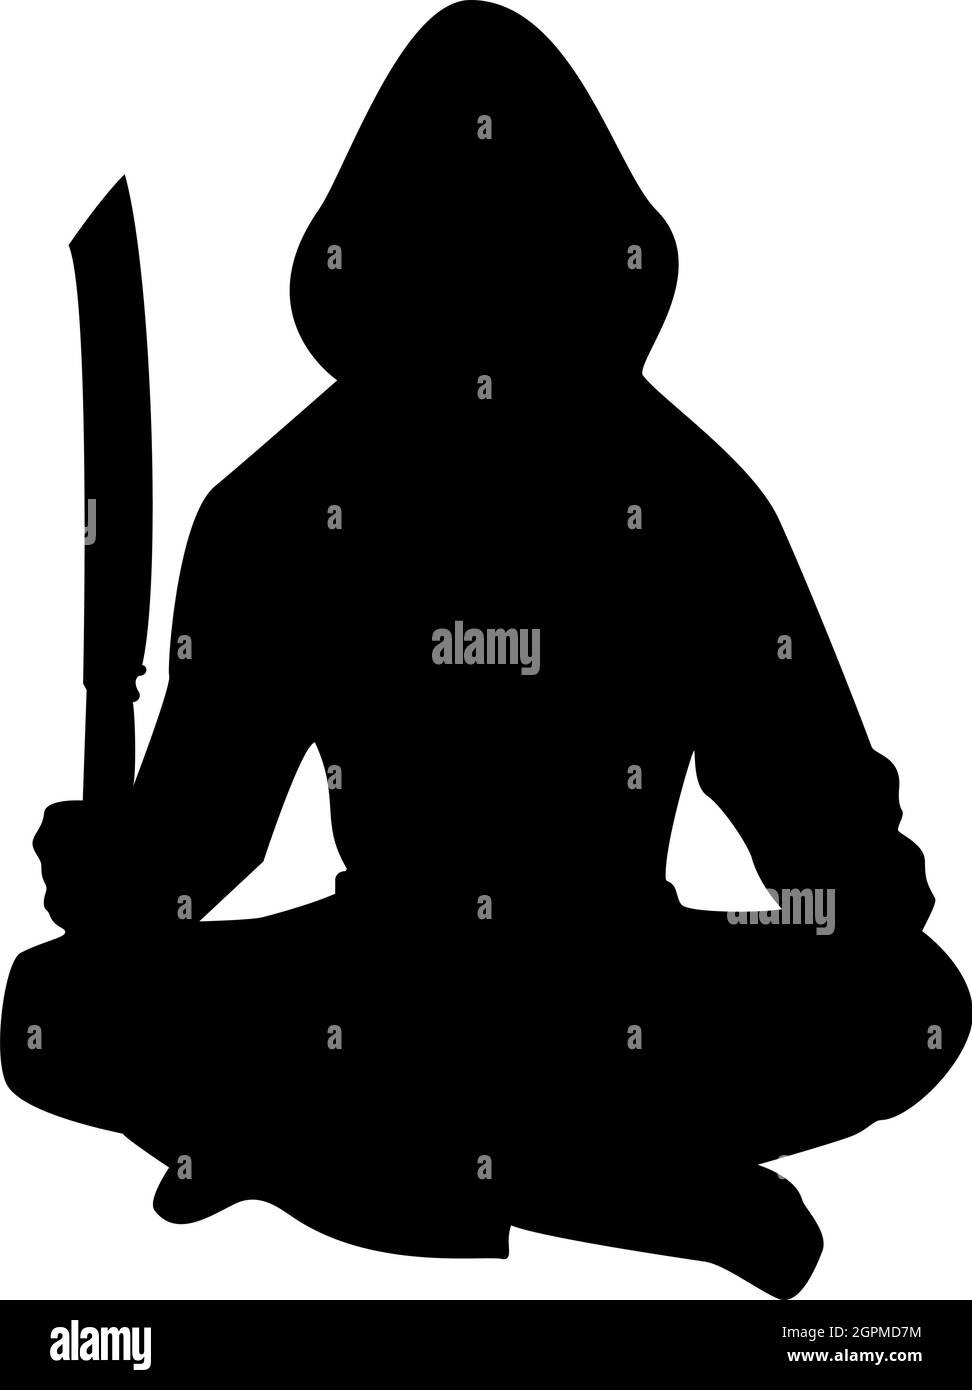 Silhouette man with sword machete cold weapons in hand military man soldier serviceman in positions hunter with knife fight poses strong defender warrior concept weaponry lotus pose black color vector illustration flat style image Stock Vector